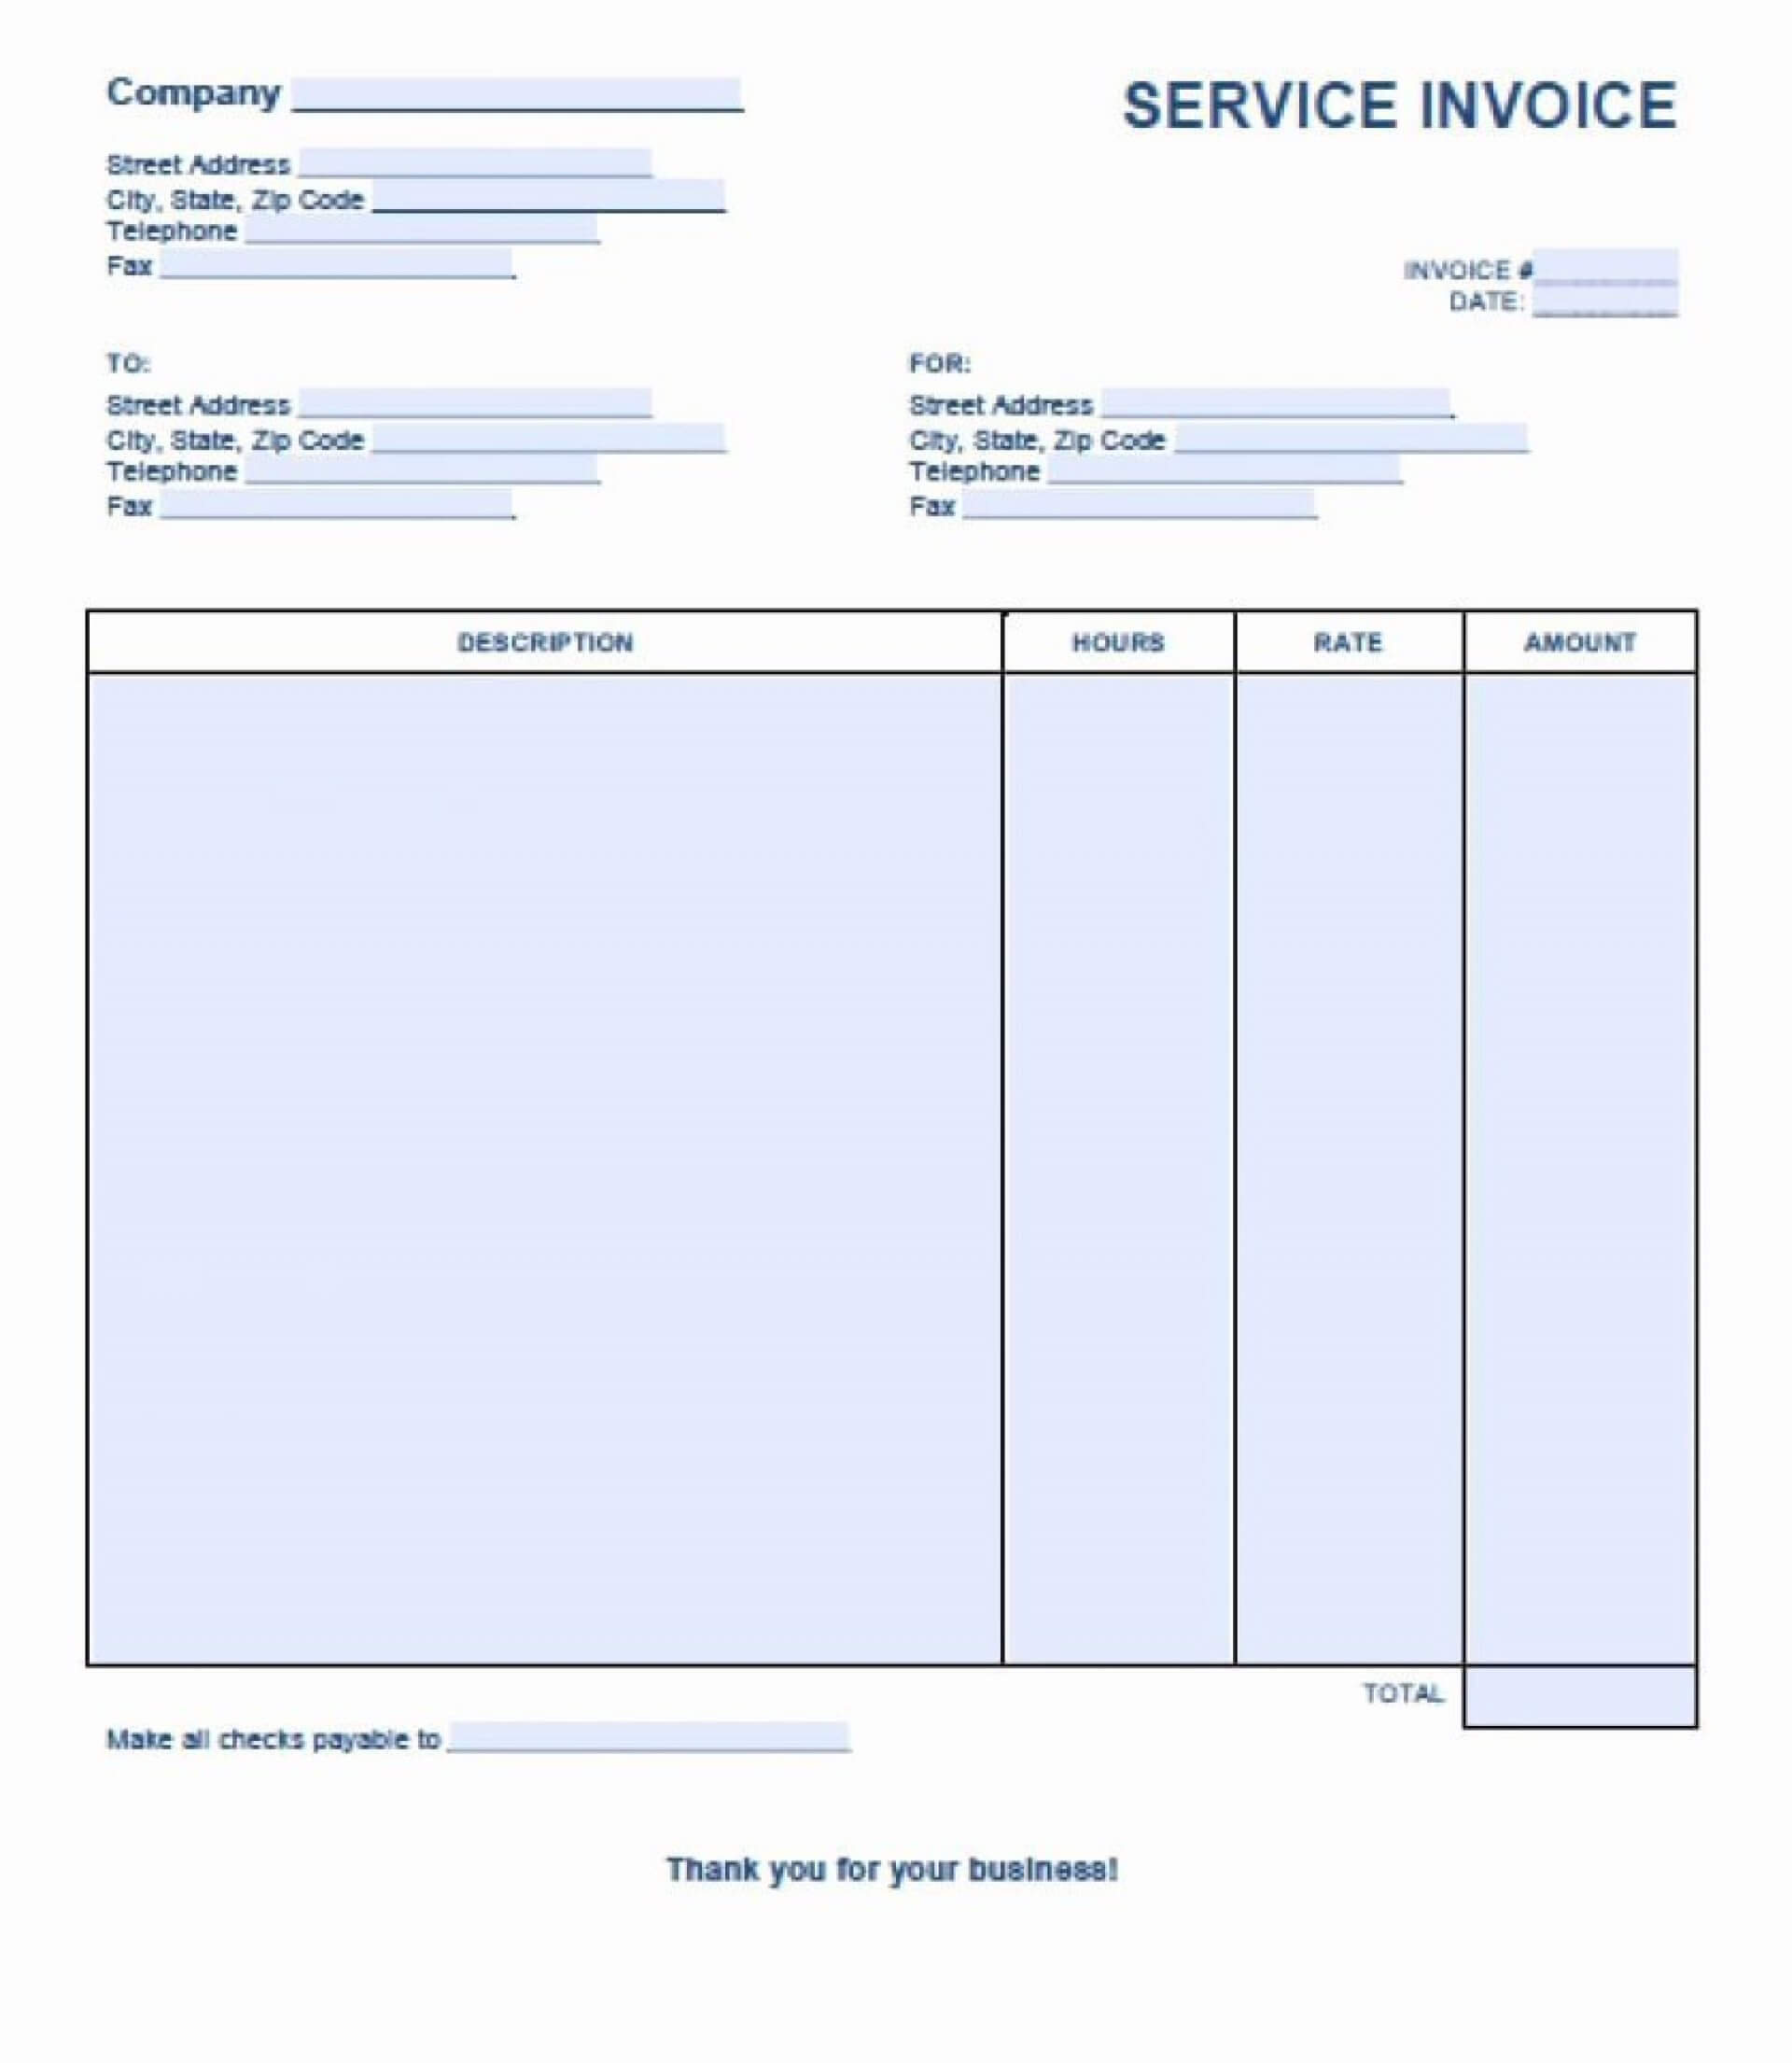 006 Free Invoice Template For Word Ideas Segmenouldings Within Invoice Template Word 2010